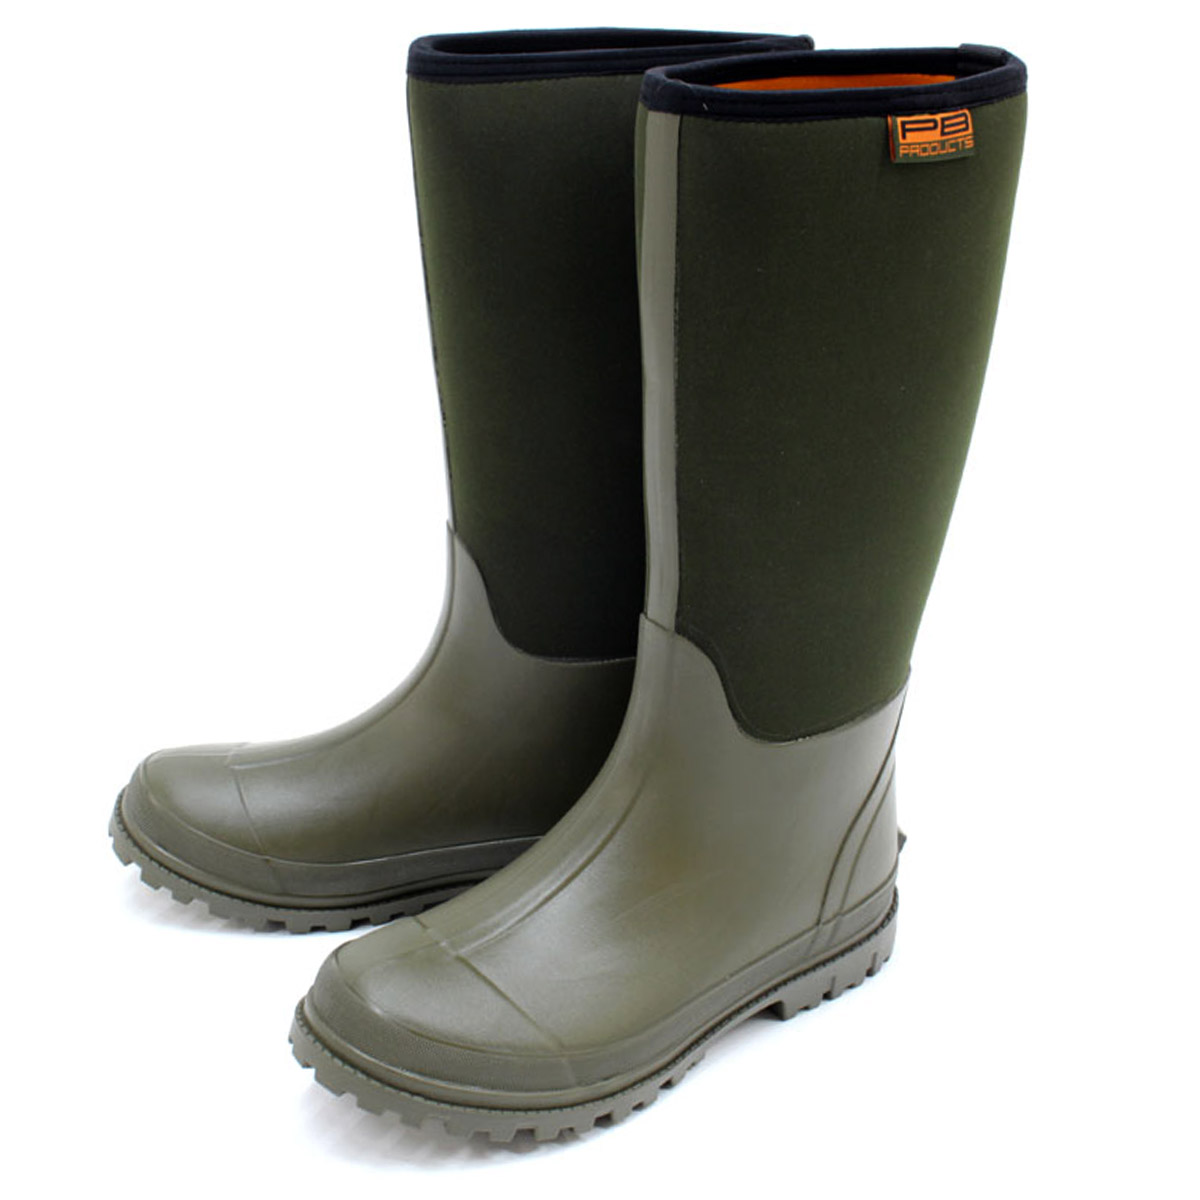 PB Products 6MM Dual Layer Neoprene Boots